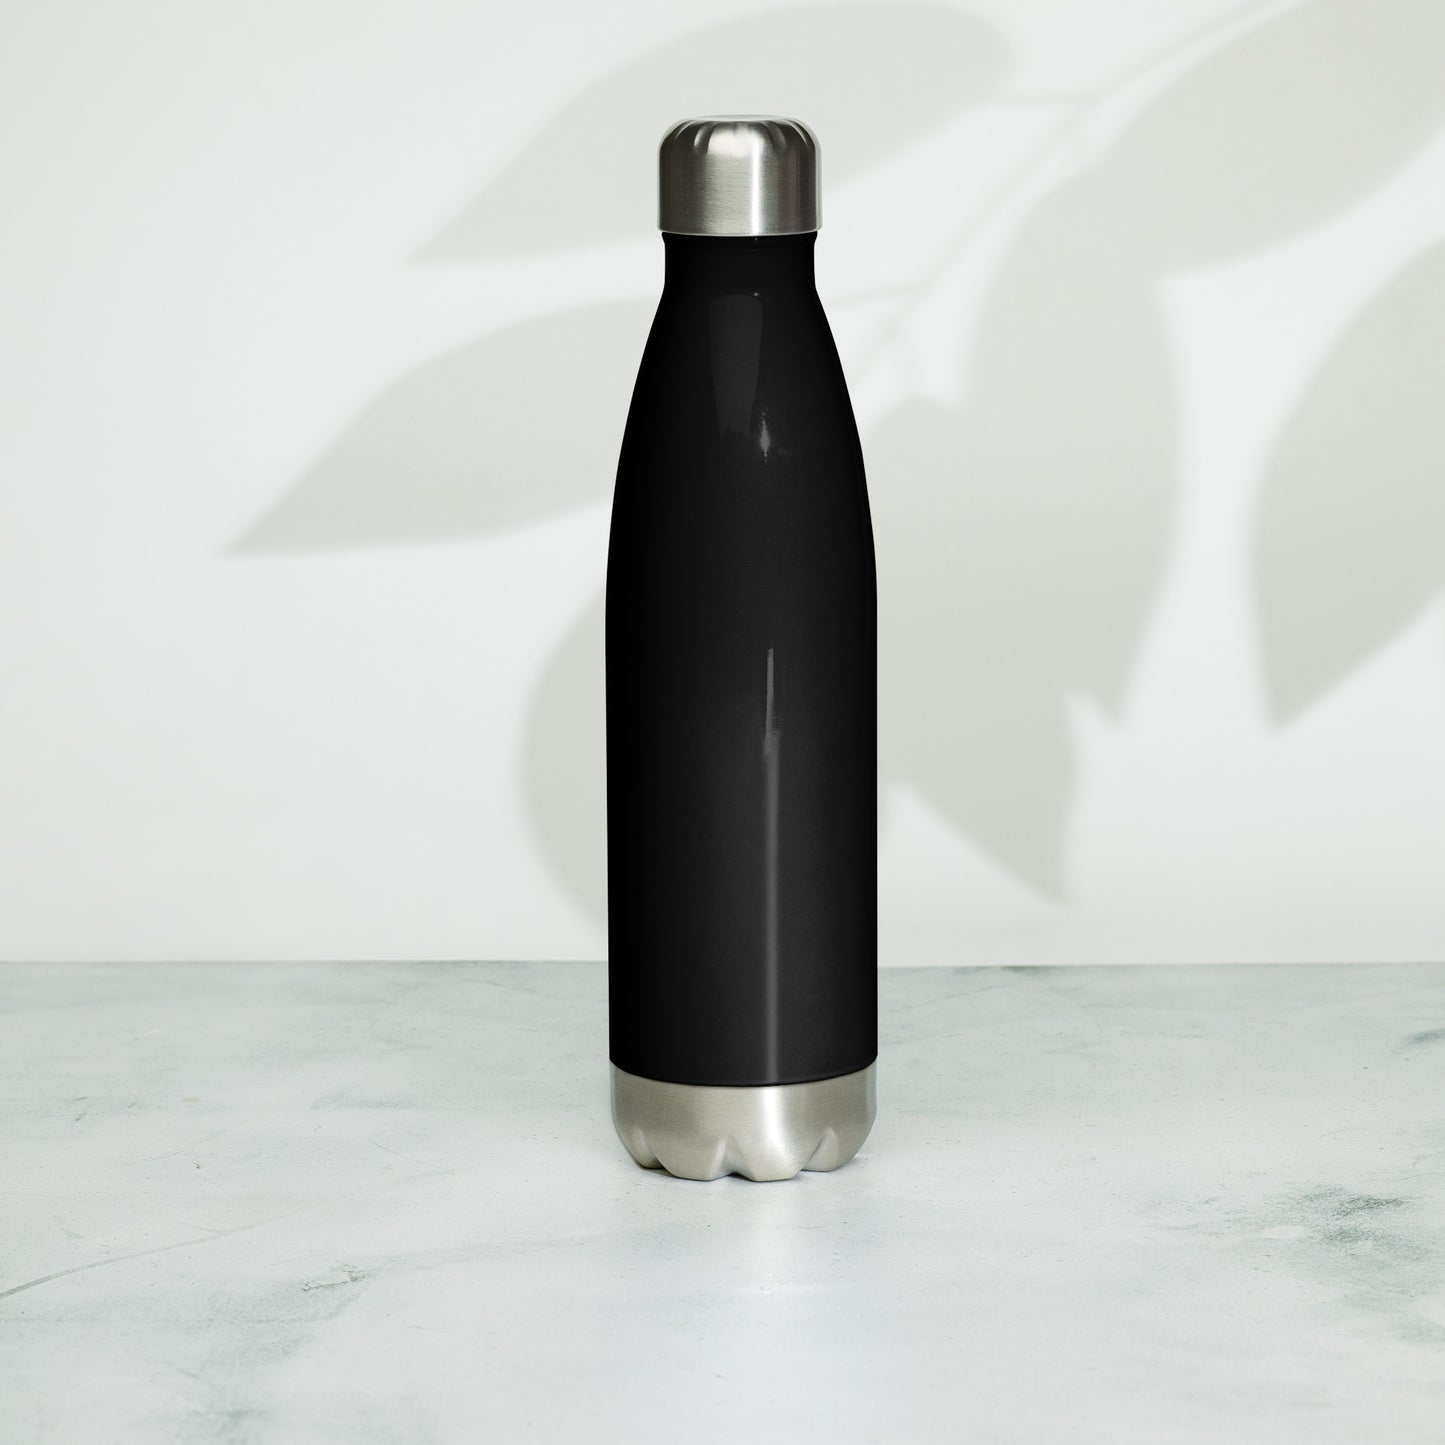 RetroRevive "Vintage Vibes, Modern Message" Stainless Steel Water Bottle